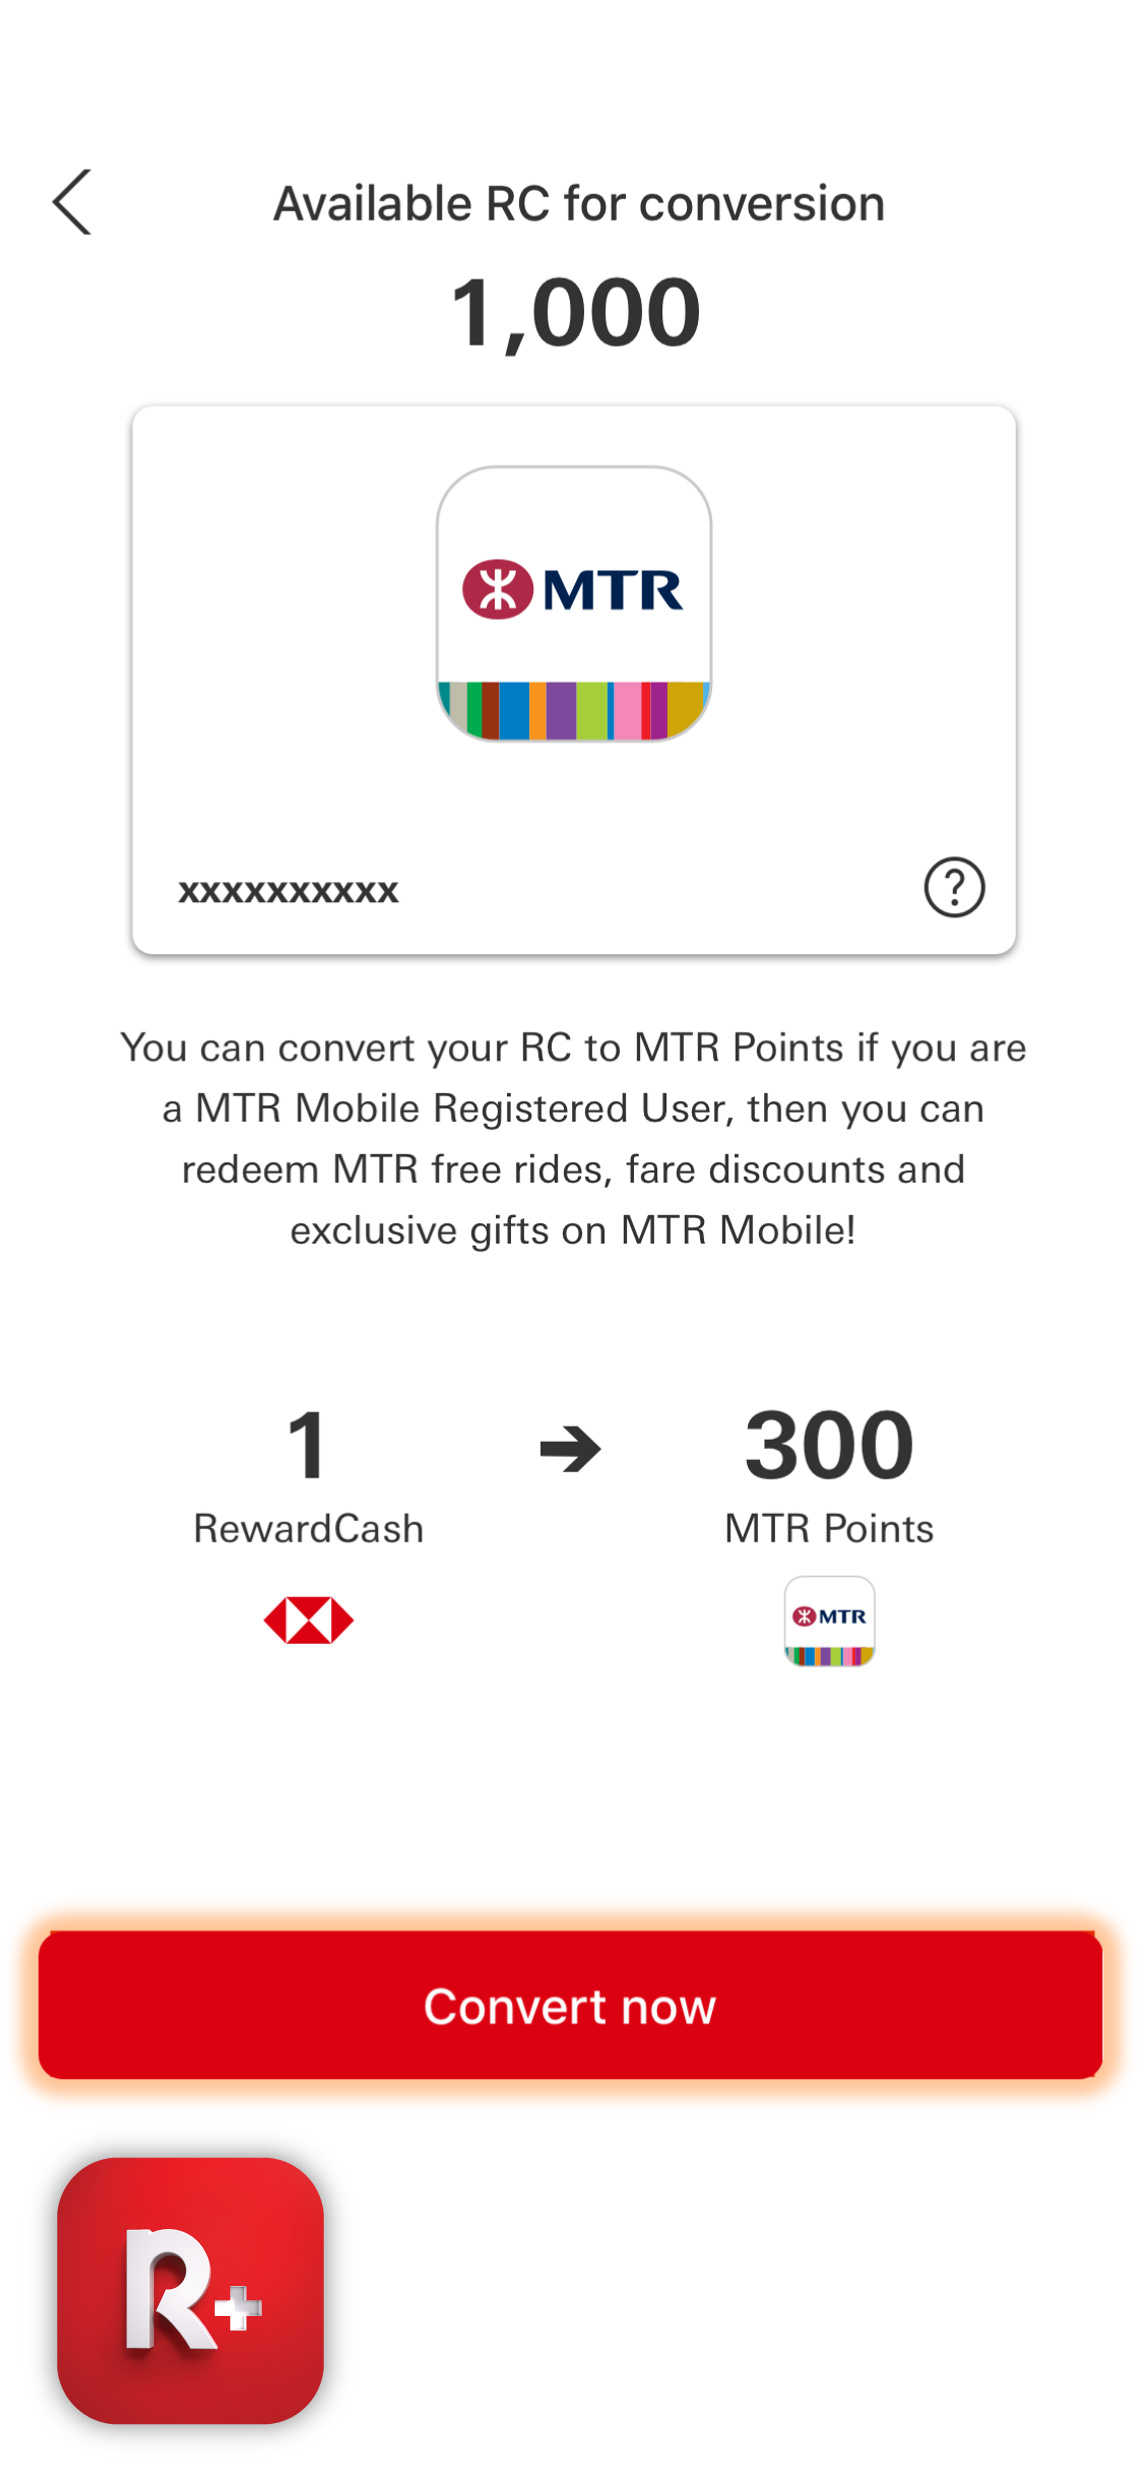 Convert HSBC RewardCash to MTR Points after connecting account successfully